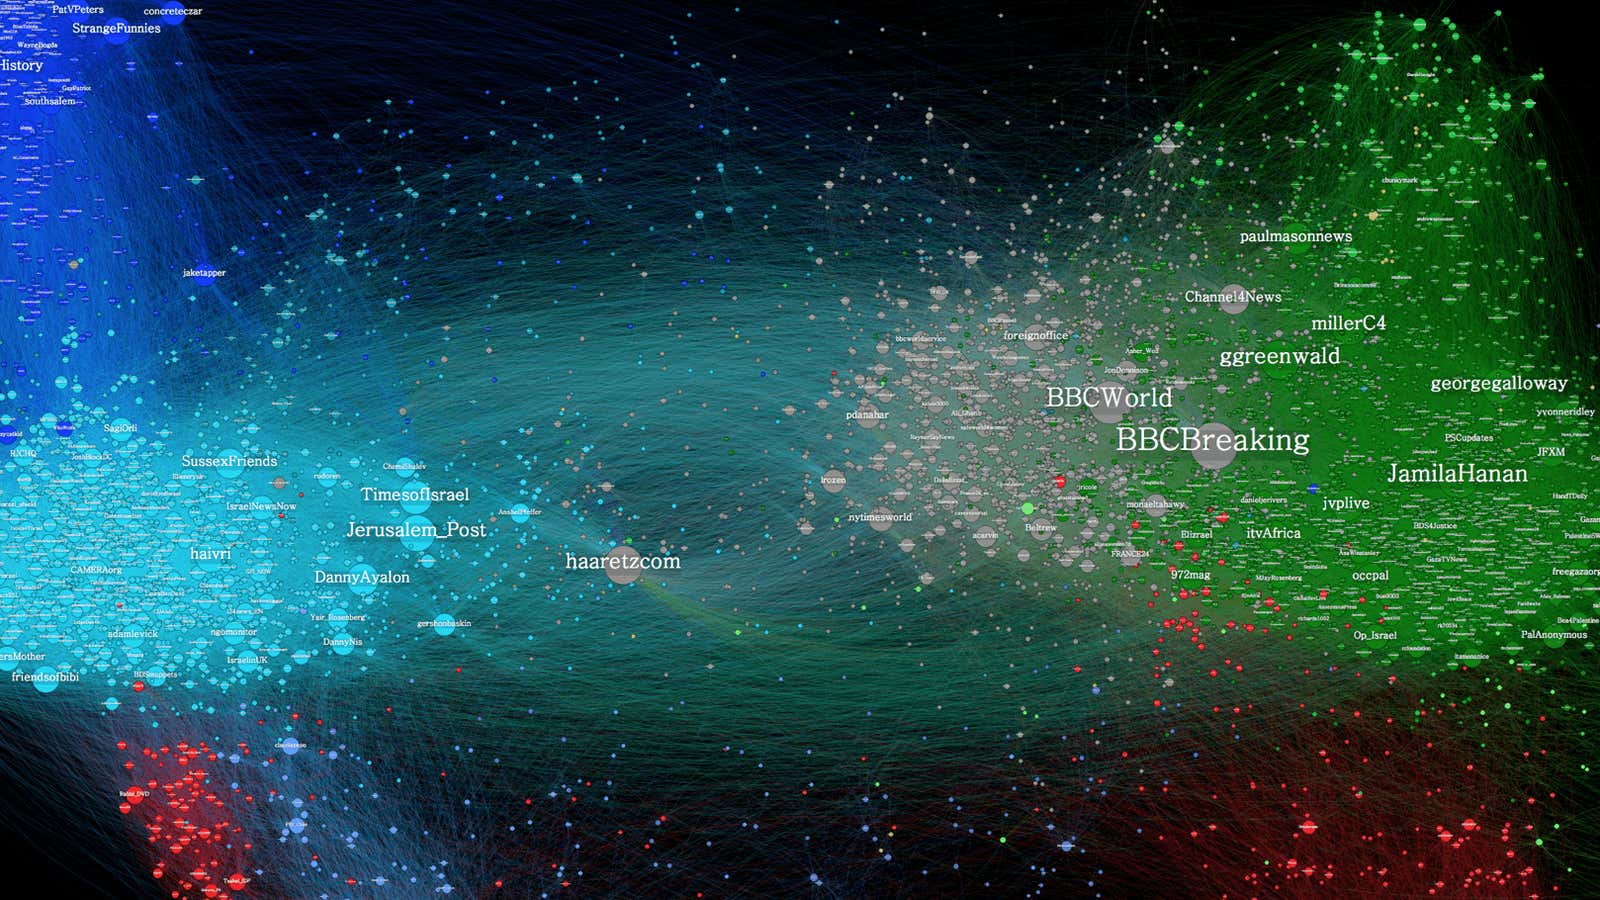 A map of connections between Twitter accounts responding to an UNWRA school bombing in July.